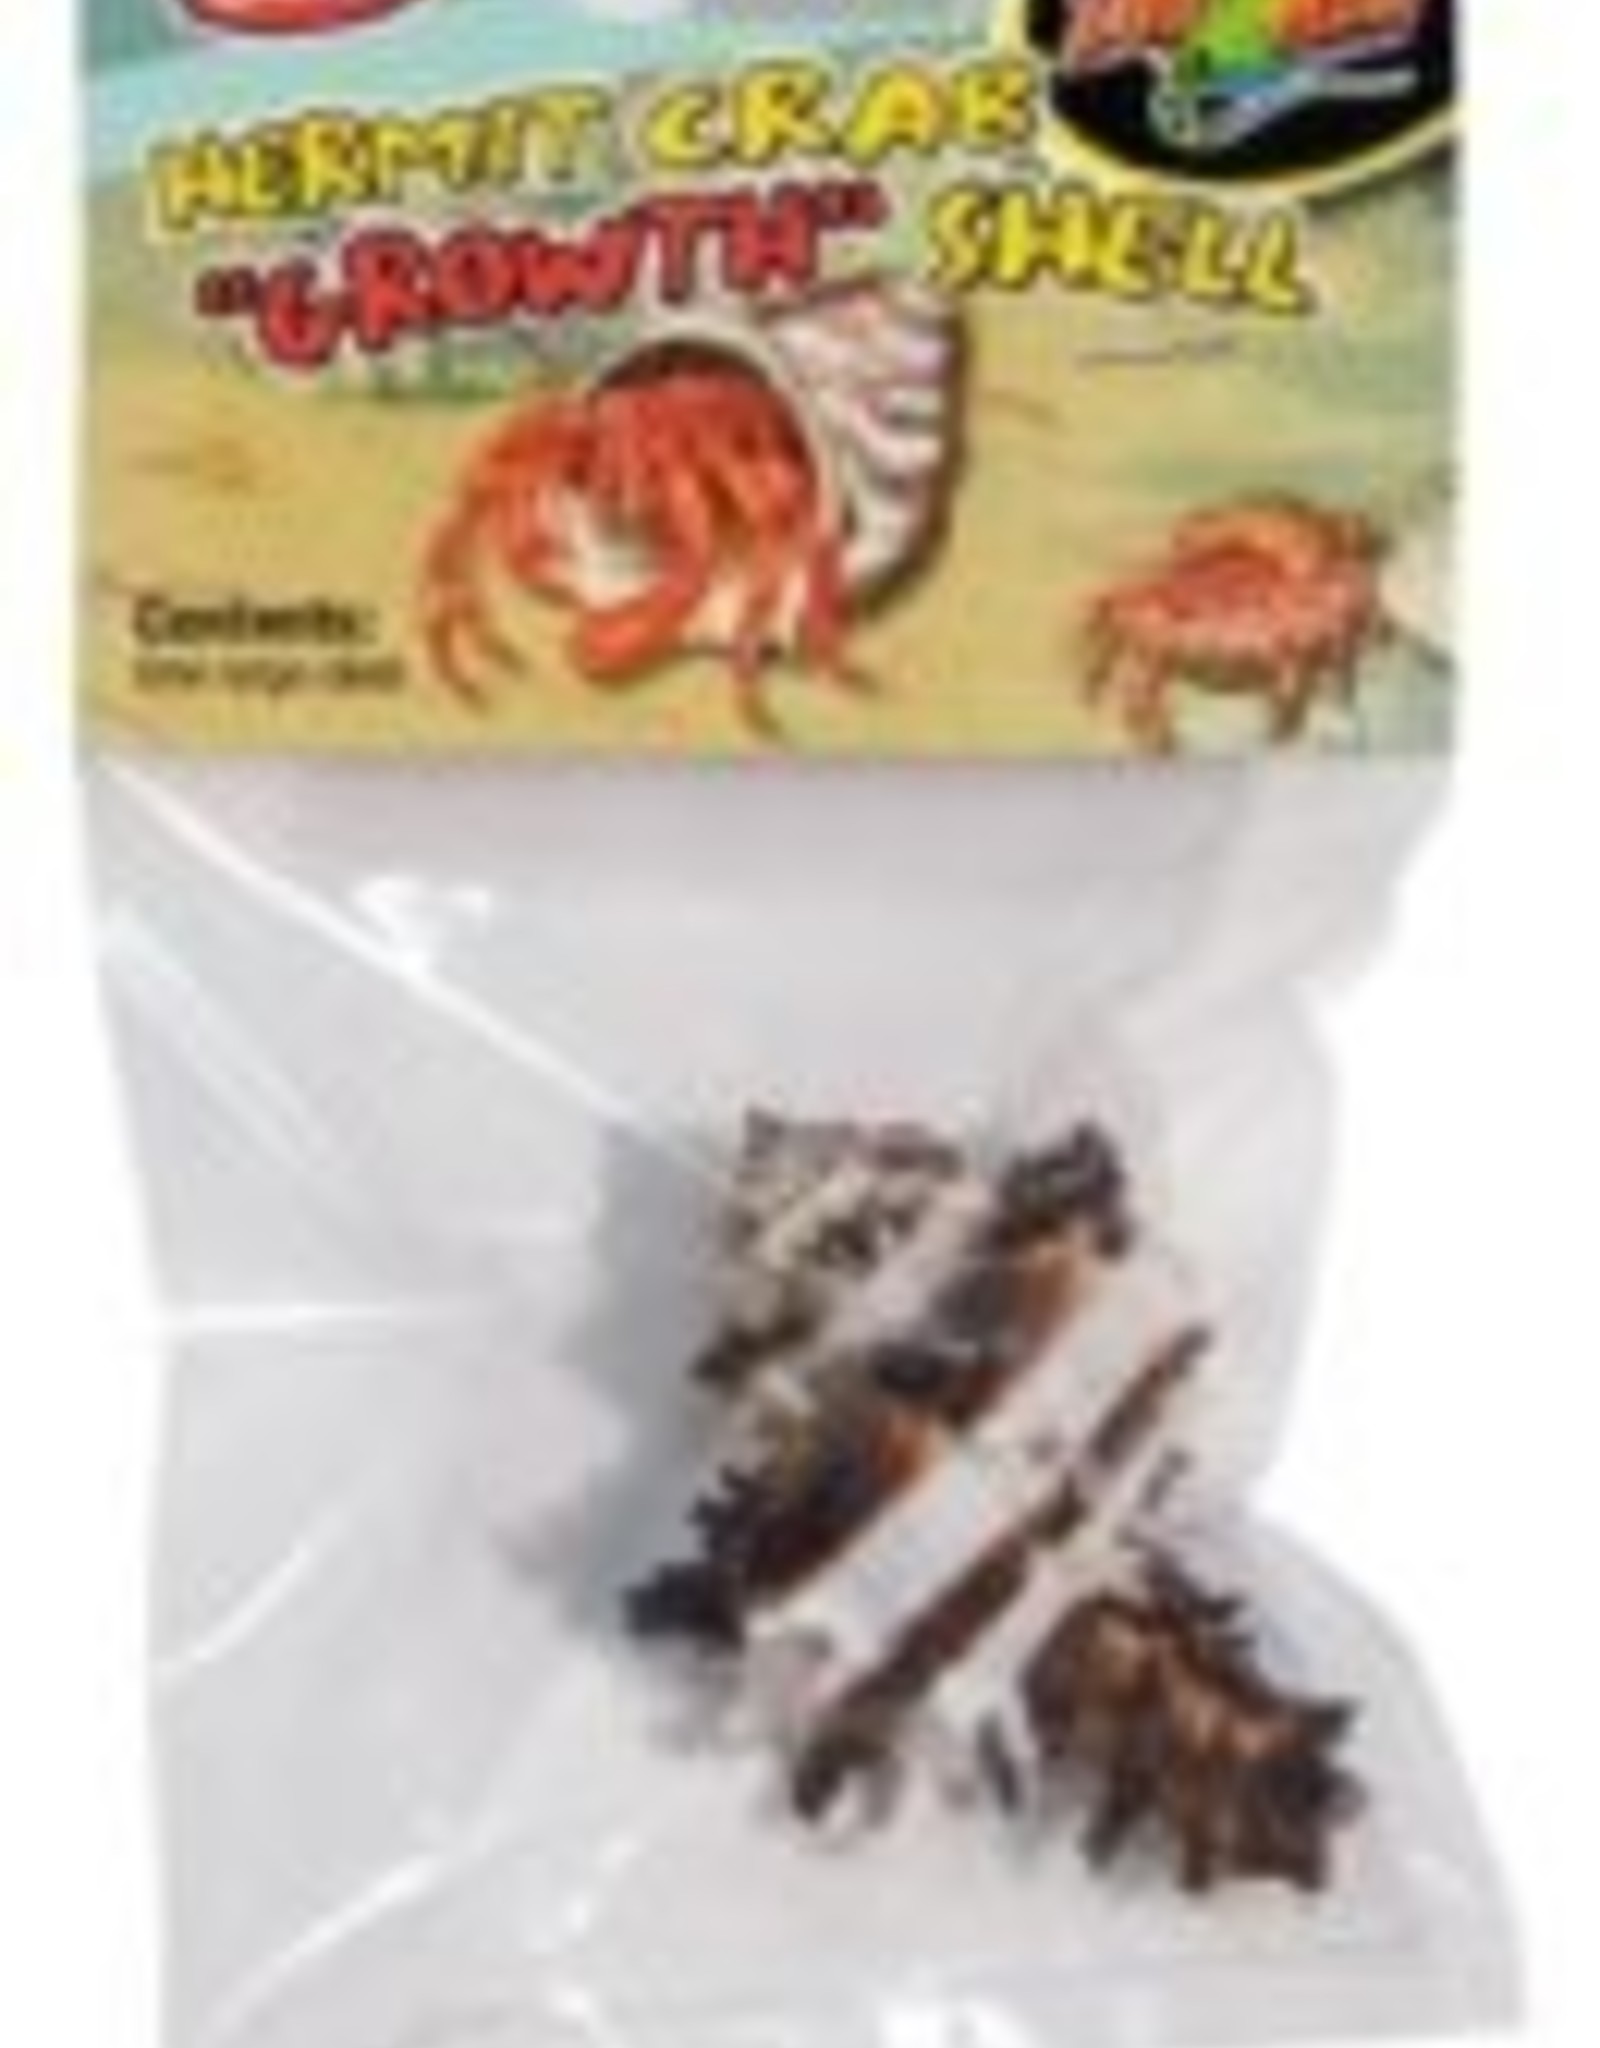 ZOO MED LABS INC ZOOMED HERMIT CRAB SHELL 1 LARGE